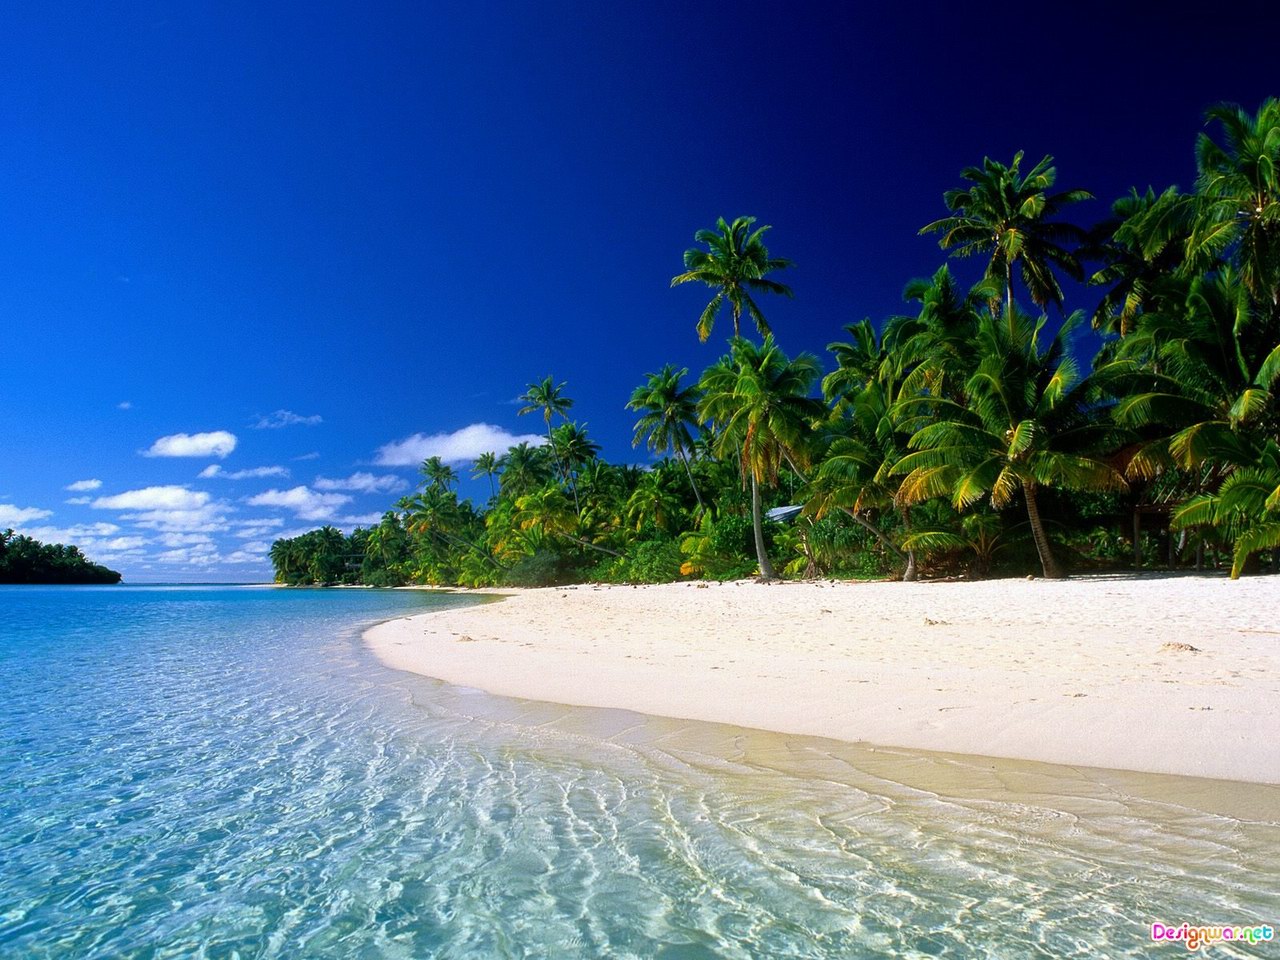  free Get Download Tropical Beach hd Wallpaper and make this wallpaper